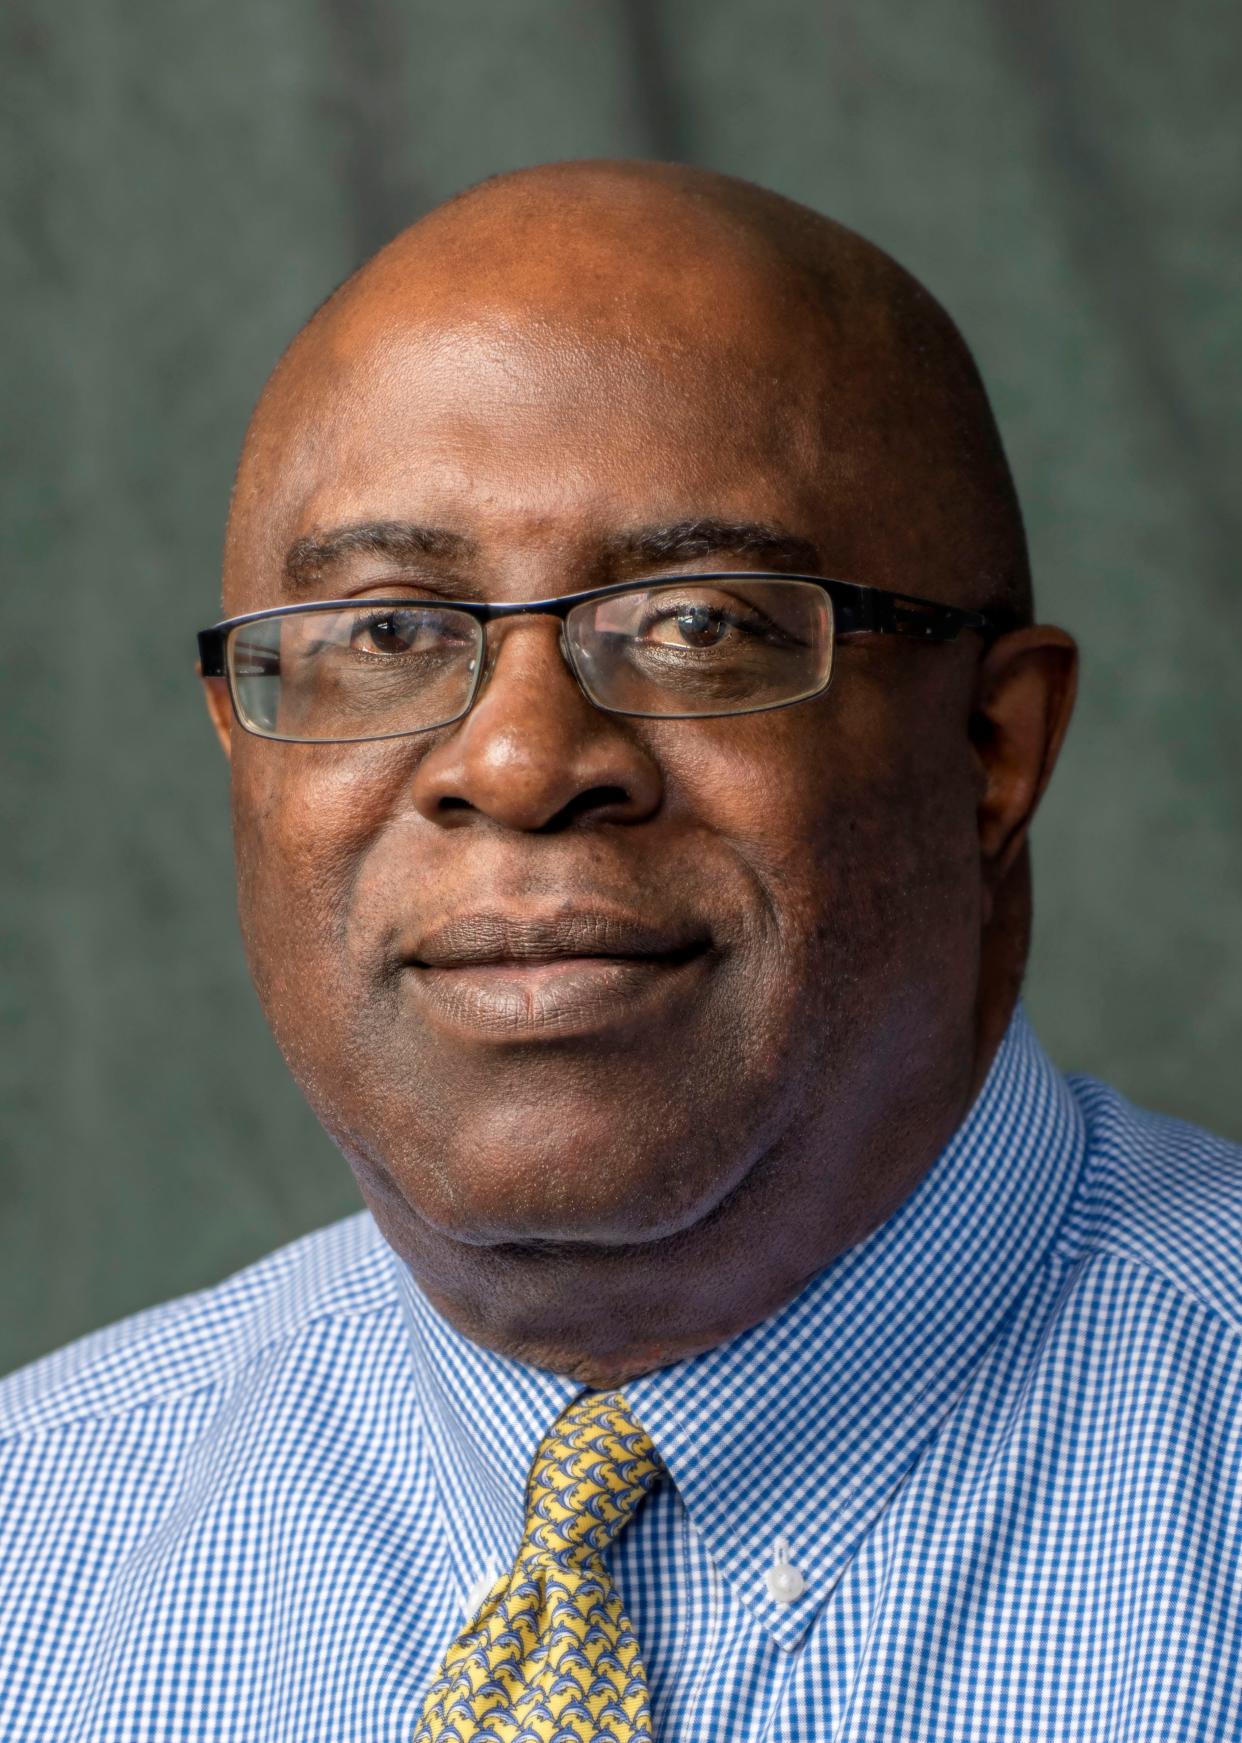 Professor James Johnson Jr., who is the newest member of the Oklahoma County jail trust.